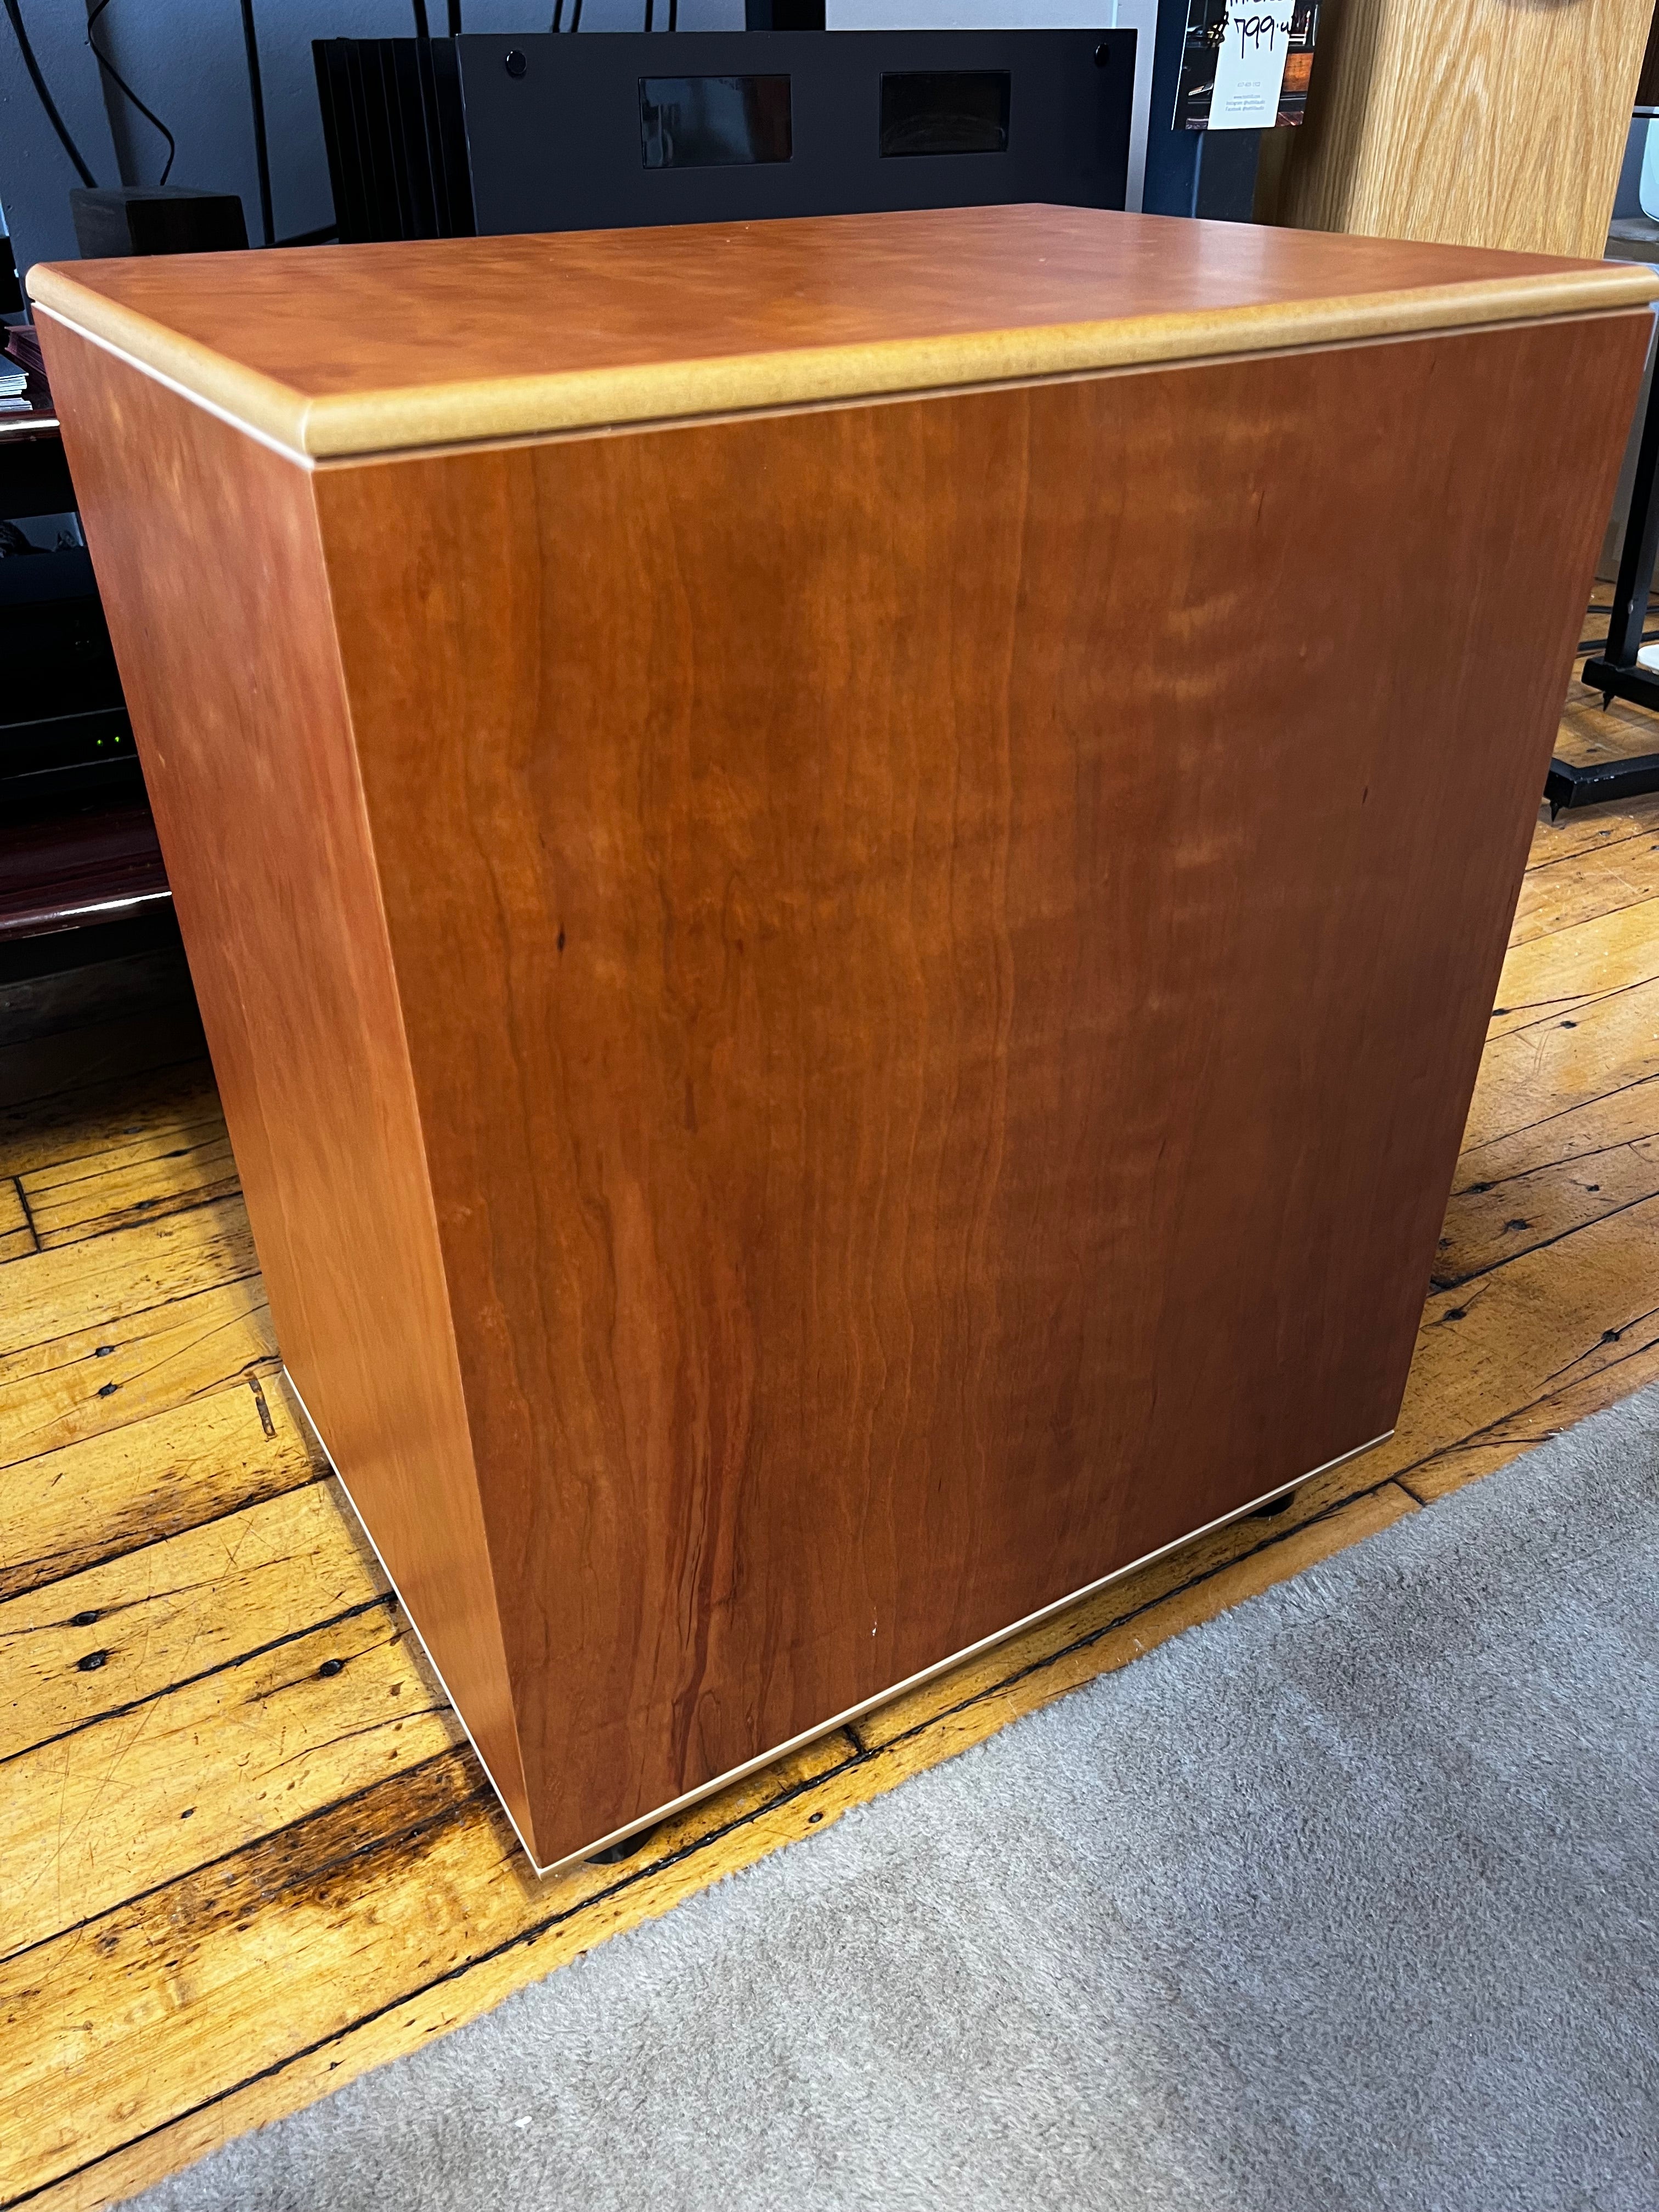 REL Strata III Subwoofer, Like New Cherry Finish - SOLD